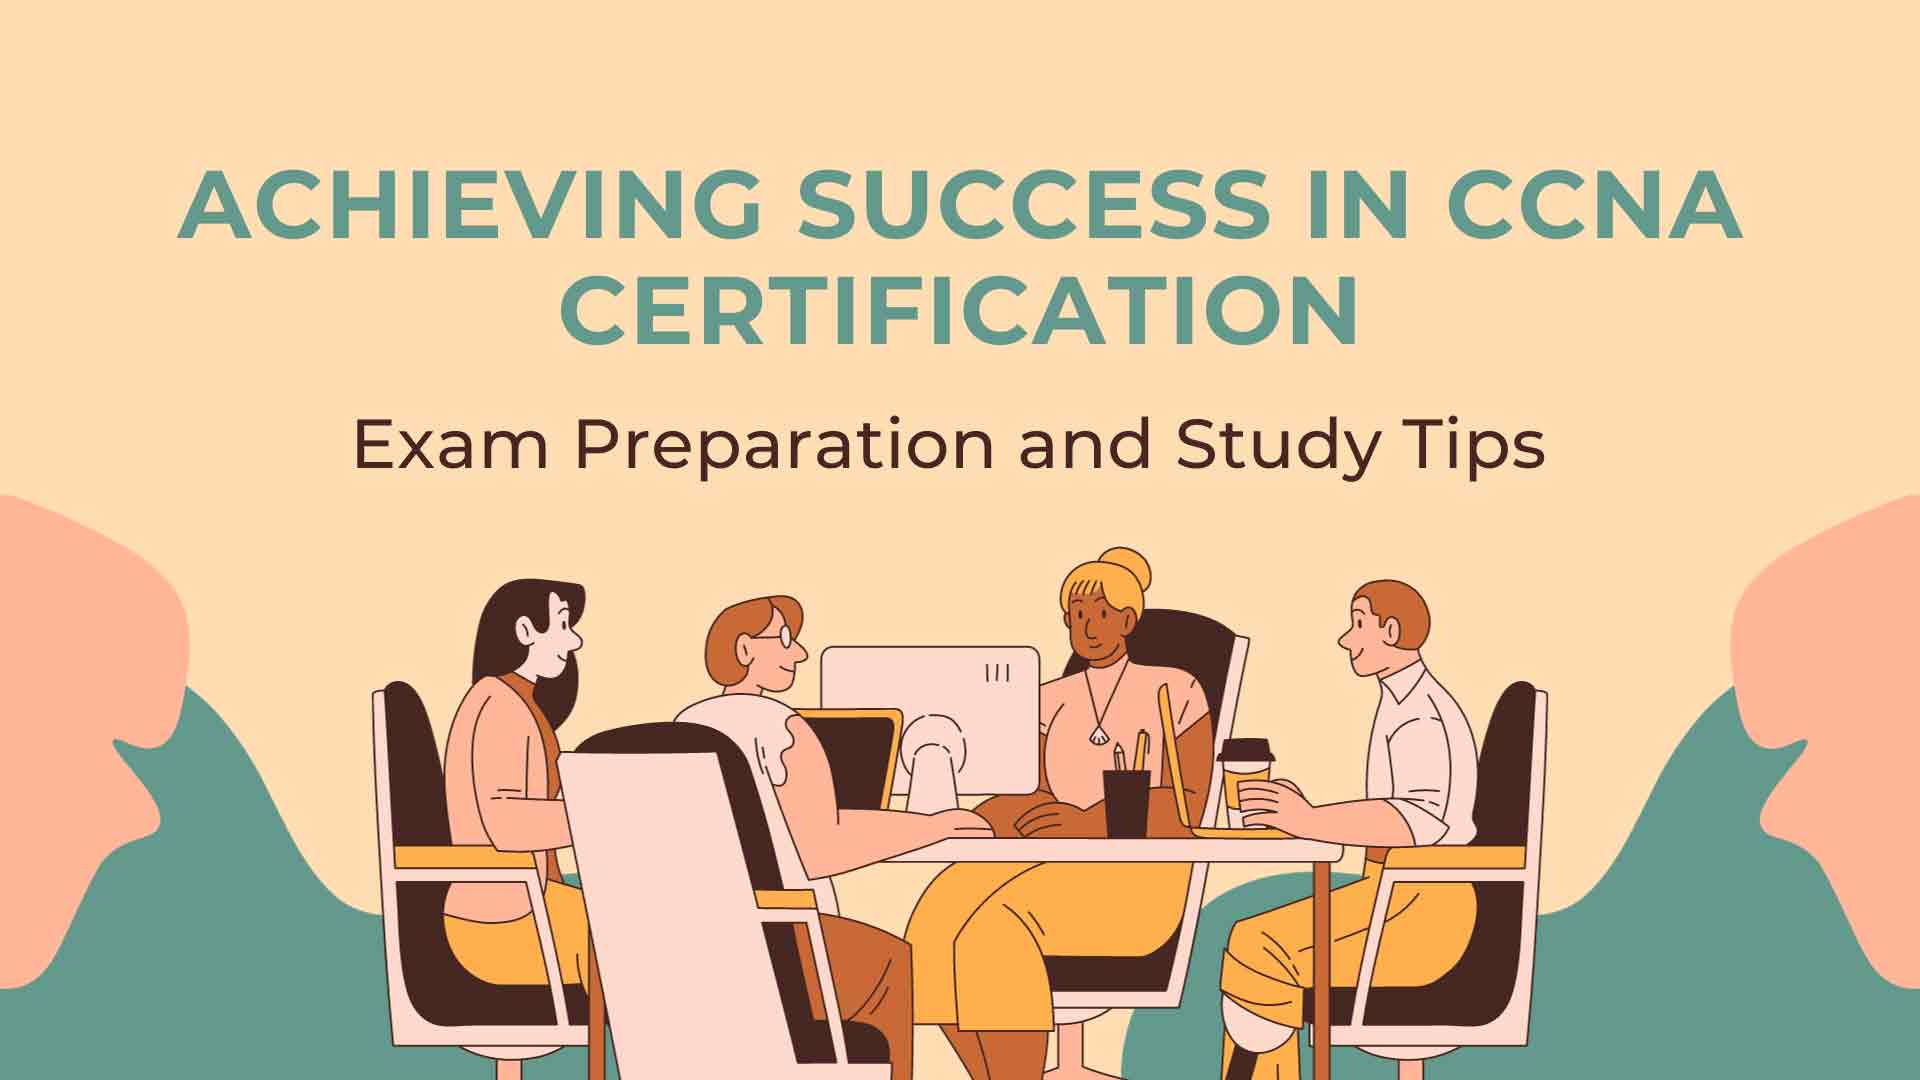 Achieving Success in CCNA Certification: Exam Preparation and Study Tips